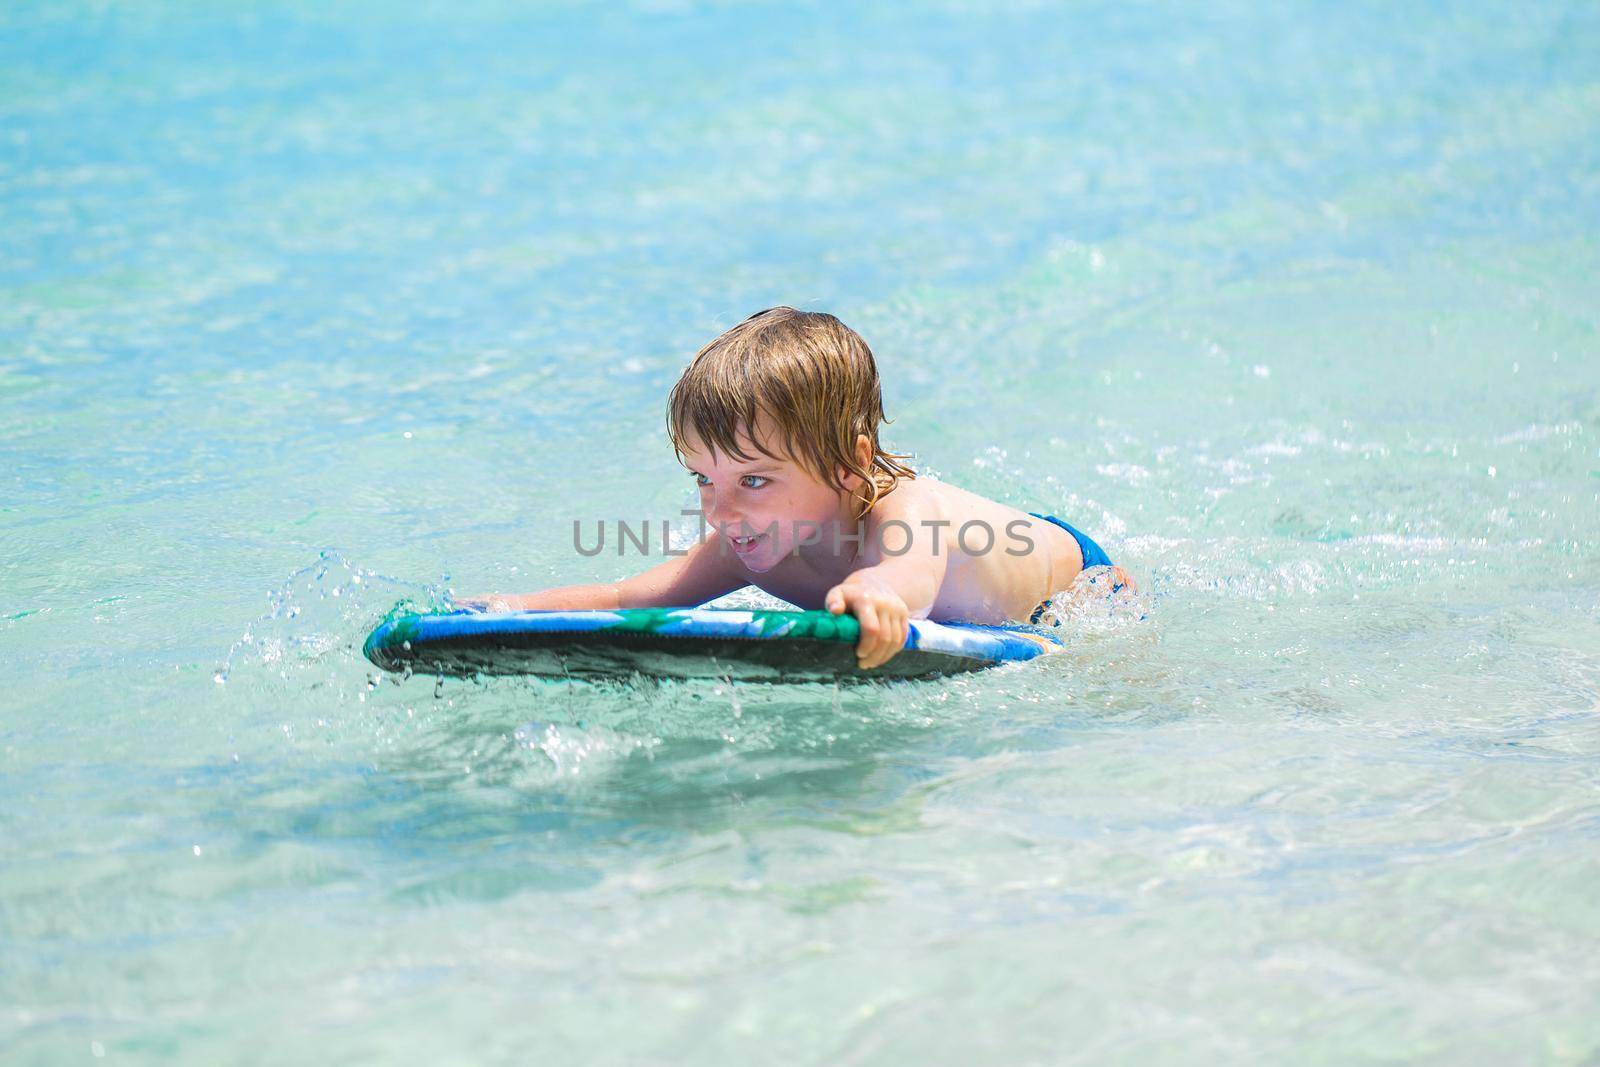 Young surfer, happy young boy in the ocean on surfboard. by StudioPeace